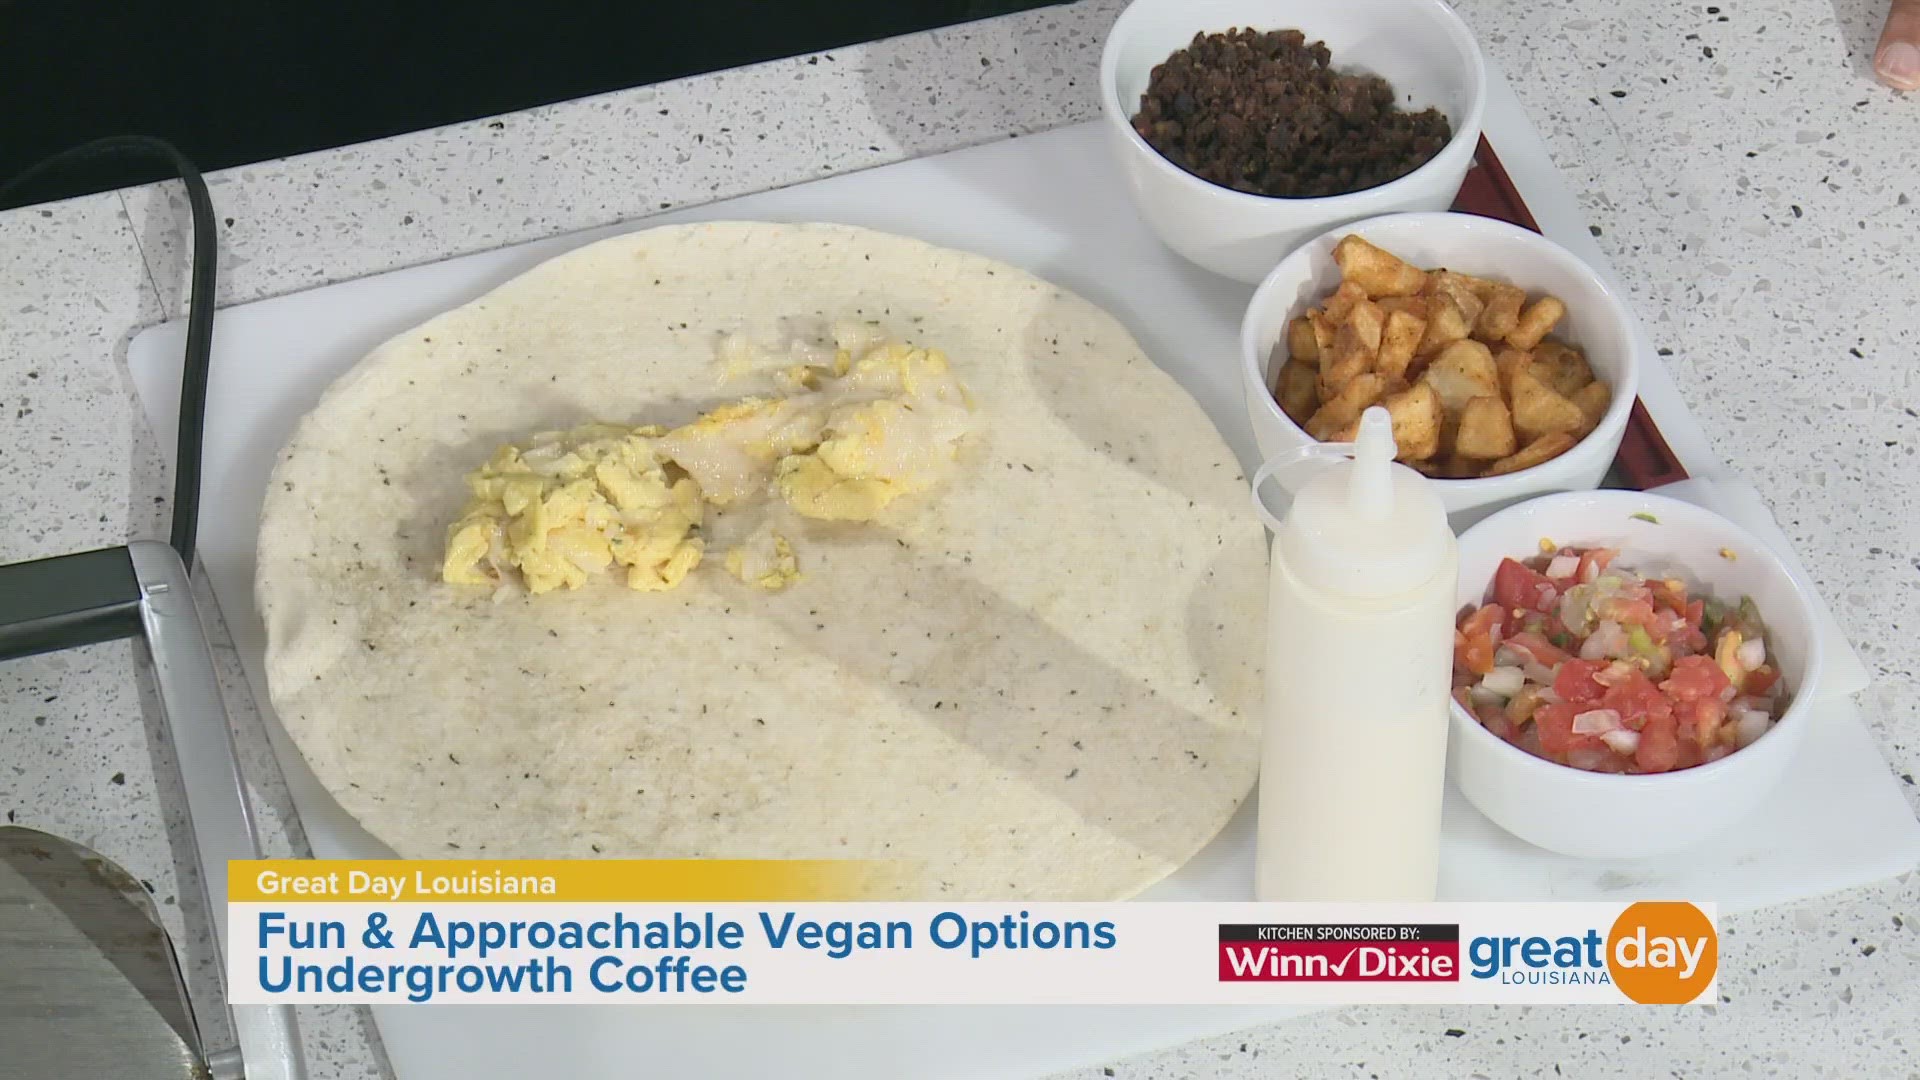 We check out another option on the menu at Undergrowth Coffee.